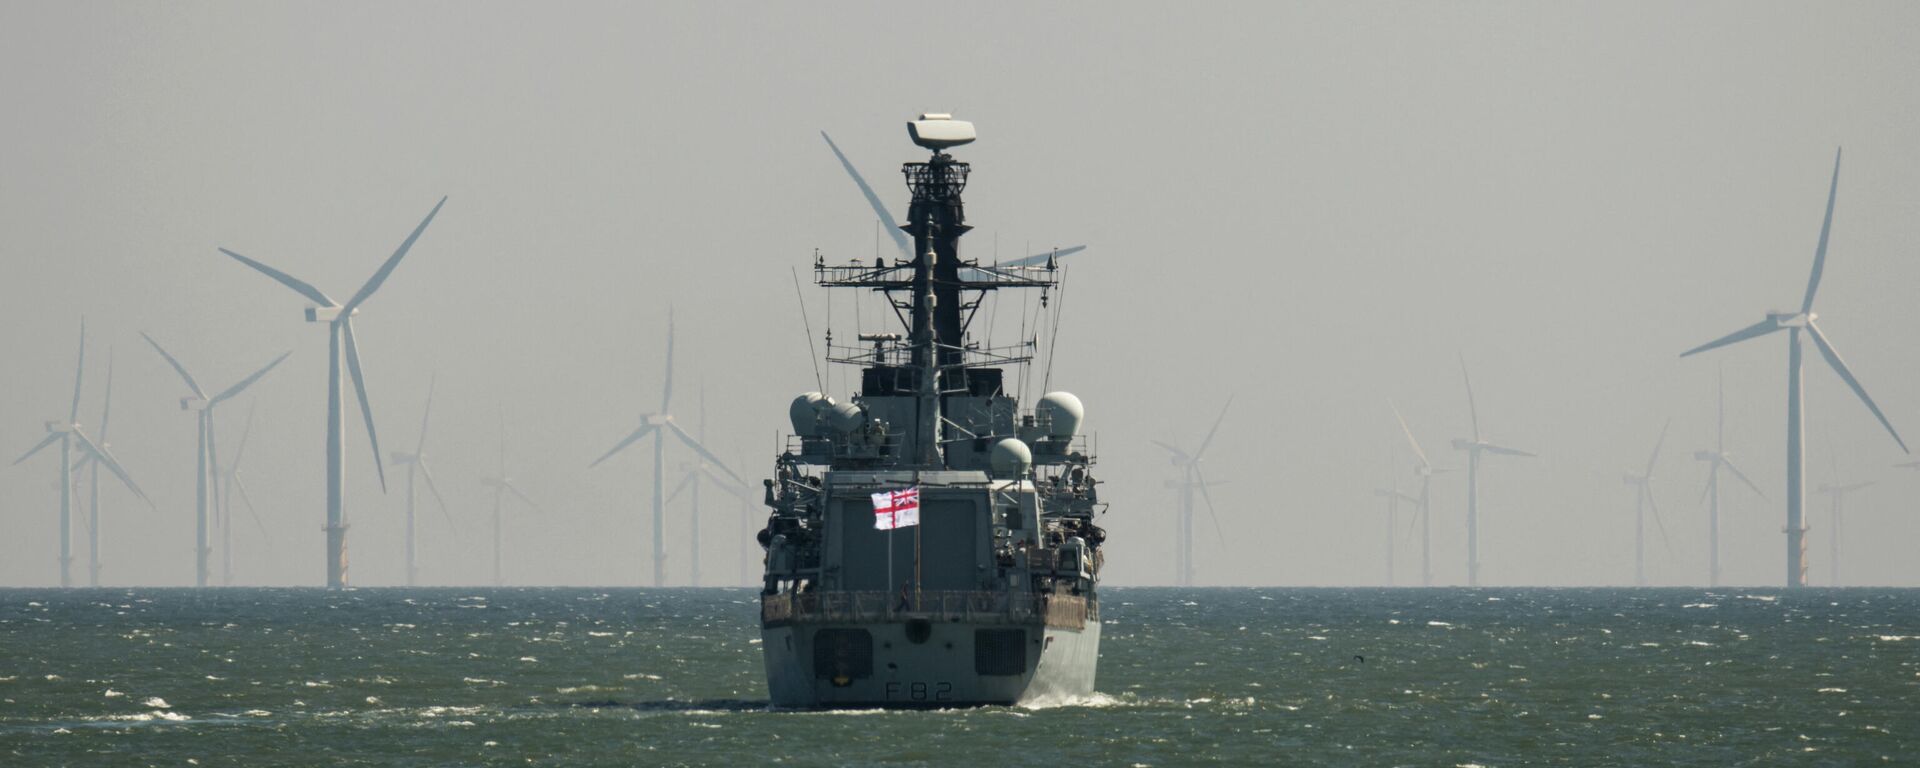 The Royal Navy Type 23 frigate HMS Somerset is moored in the harbour during the national Armed Forces Day celebrations at Llandudno, north Wales on June 30, 2018 - Sputnik International, 1920, 15.09.2021